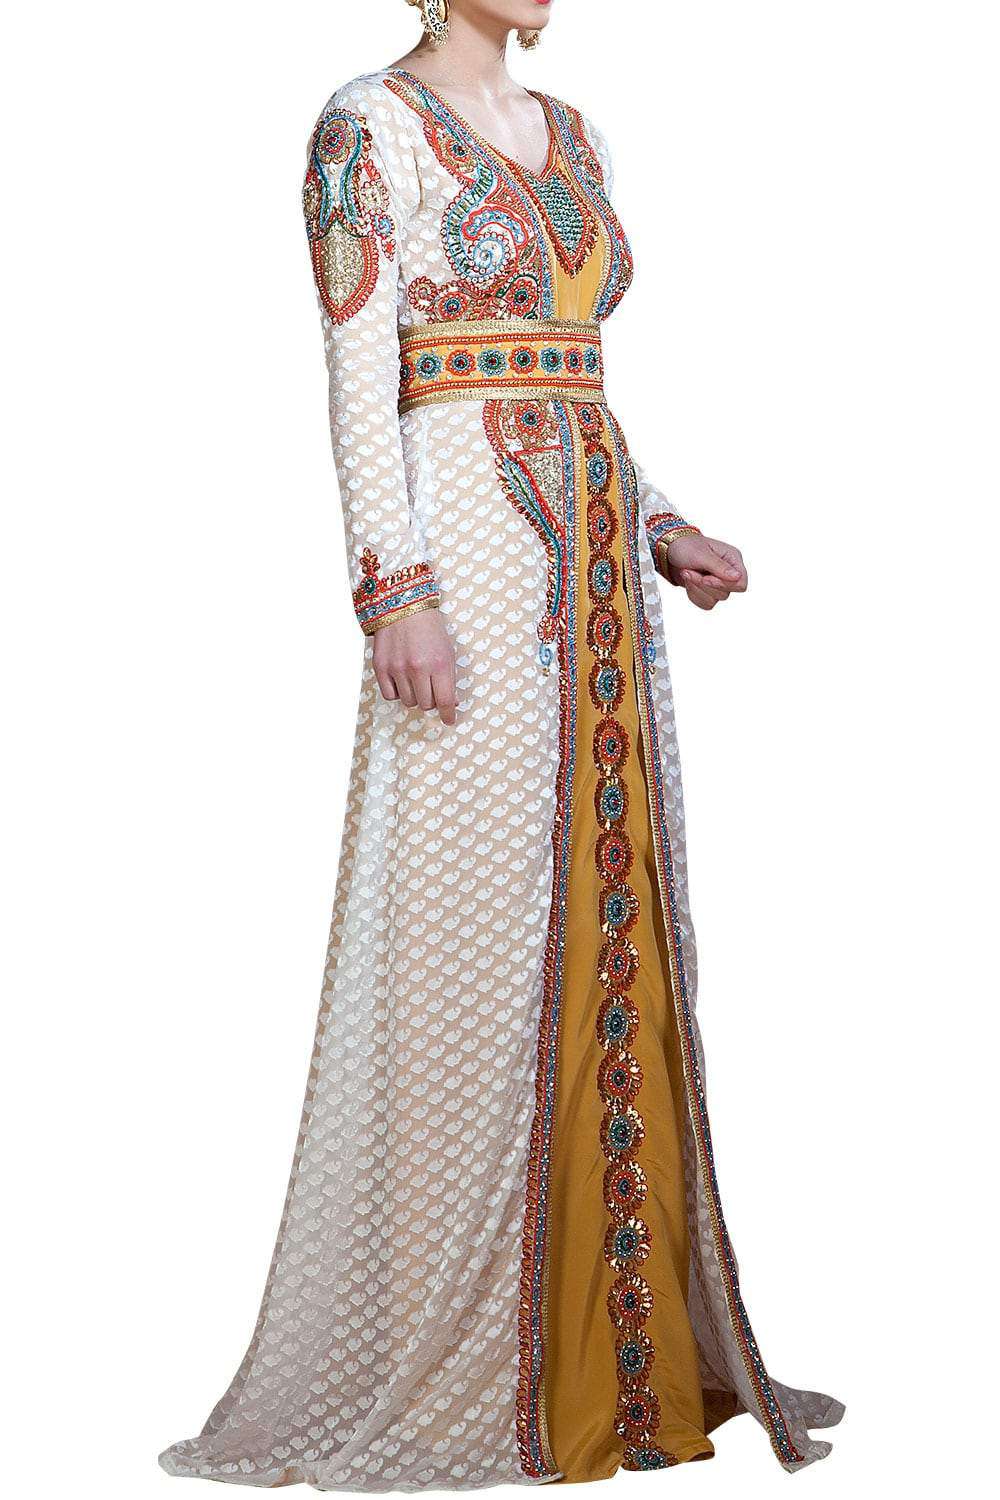 Off White and Golden Color Hand Beaded Moroccan Kaftan